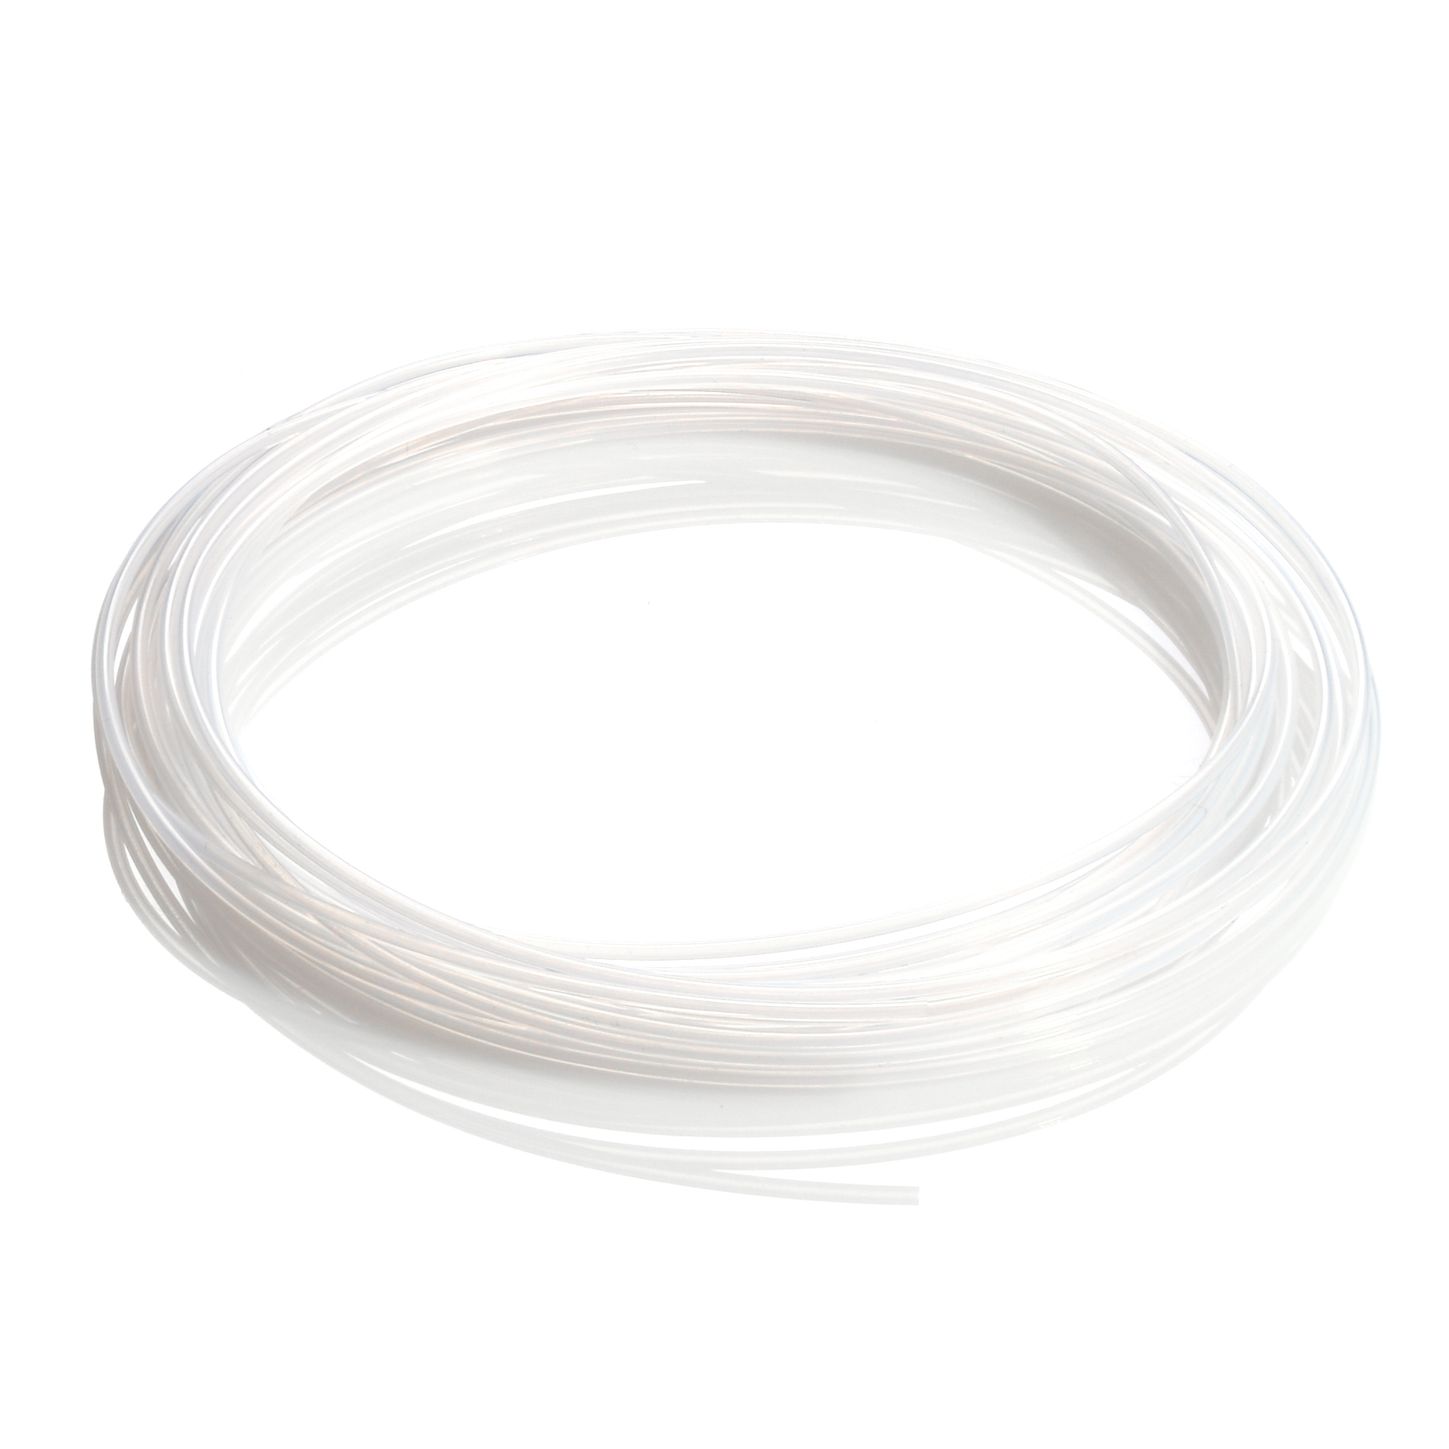 Tubing, PTFE, 0.7mm ID x 1.6mm OD, 5m, Comparable to OEM # 5062-2462 —  Sciencix